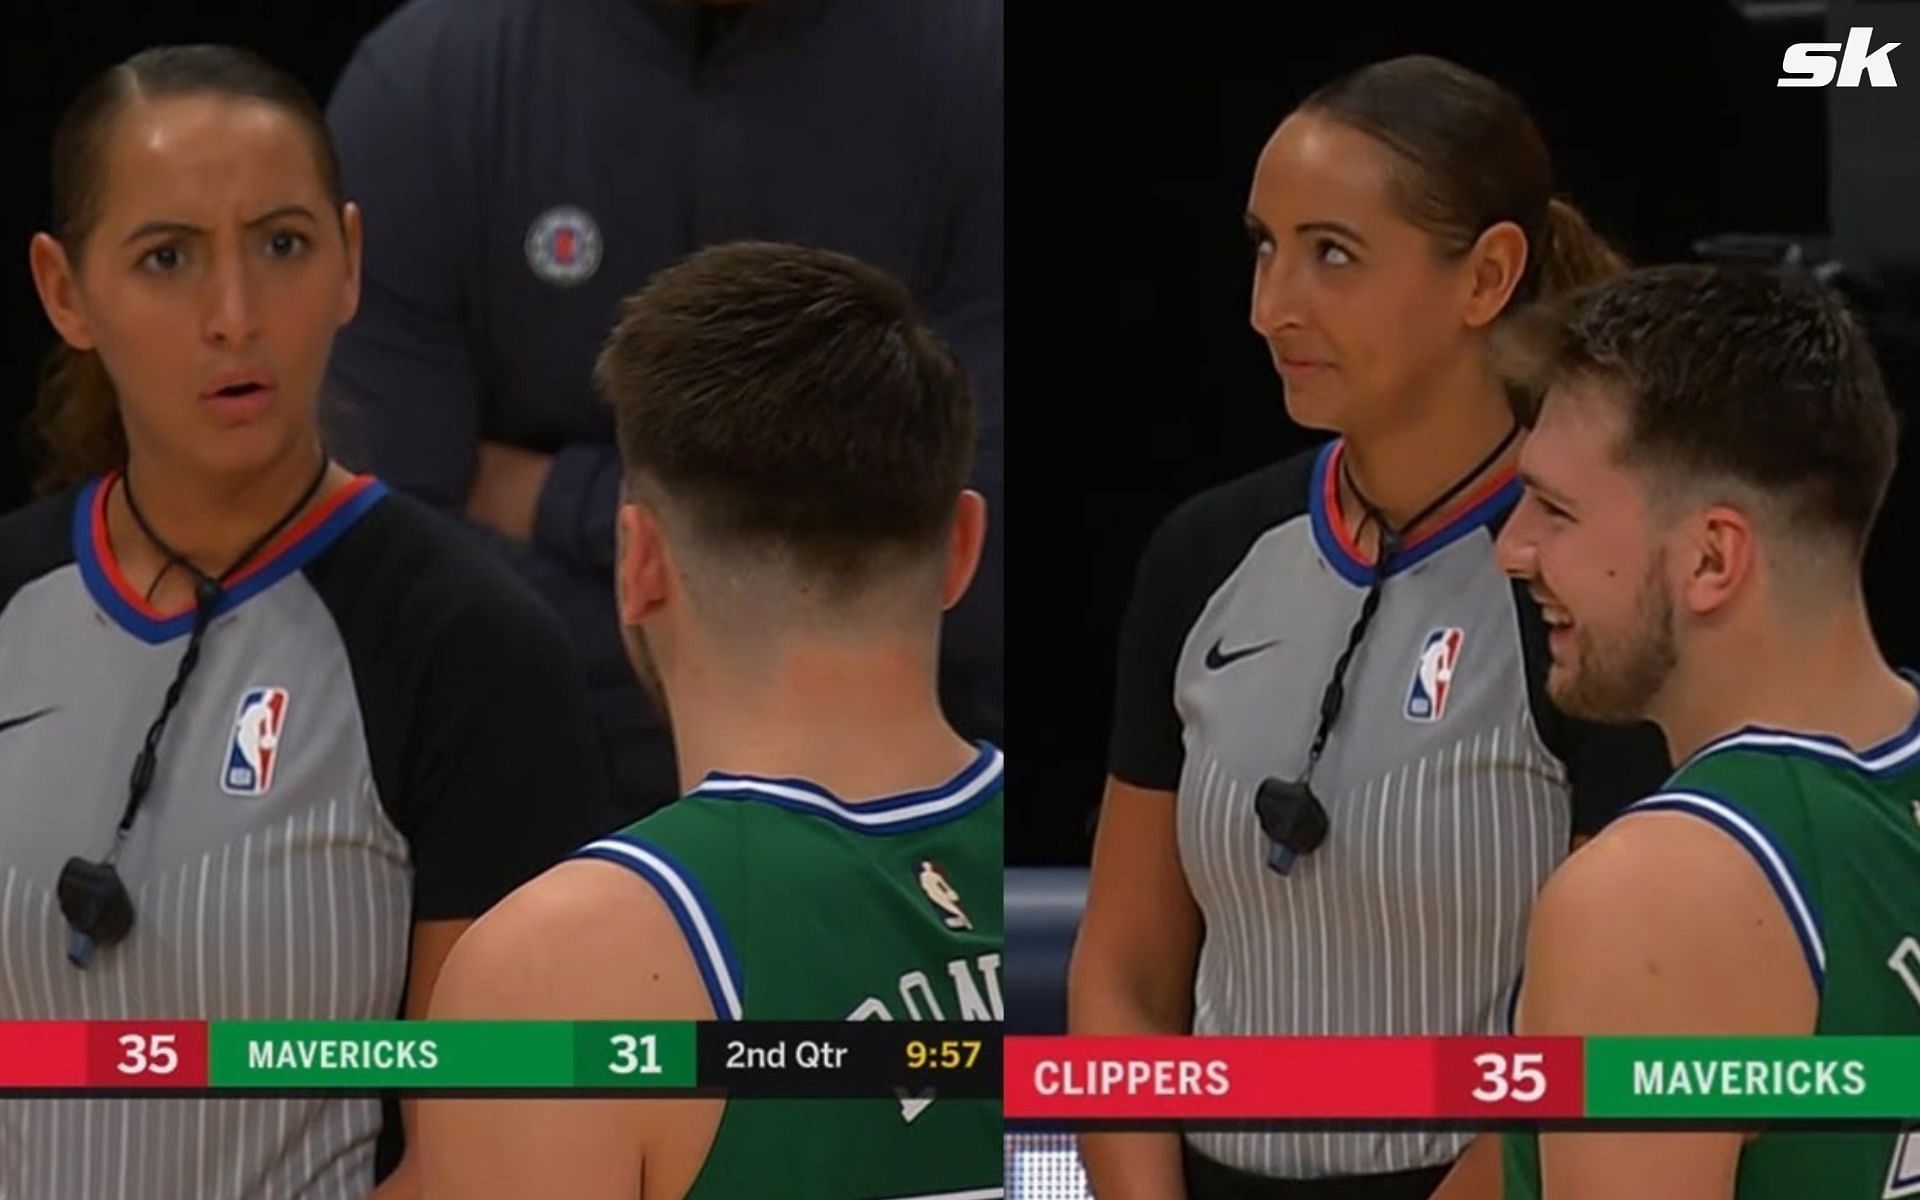 Dallas Mavericks superstar guard Luka Doncic appears to flirt with NBA referee Ashley Moyer-Gleich in a Mavs versus Clippers game on March 17th, 2021